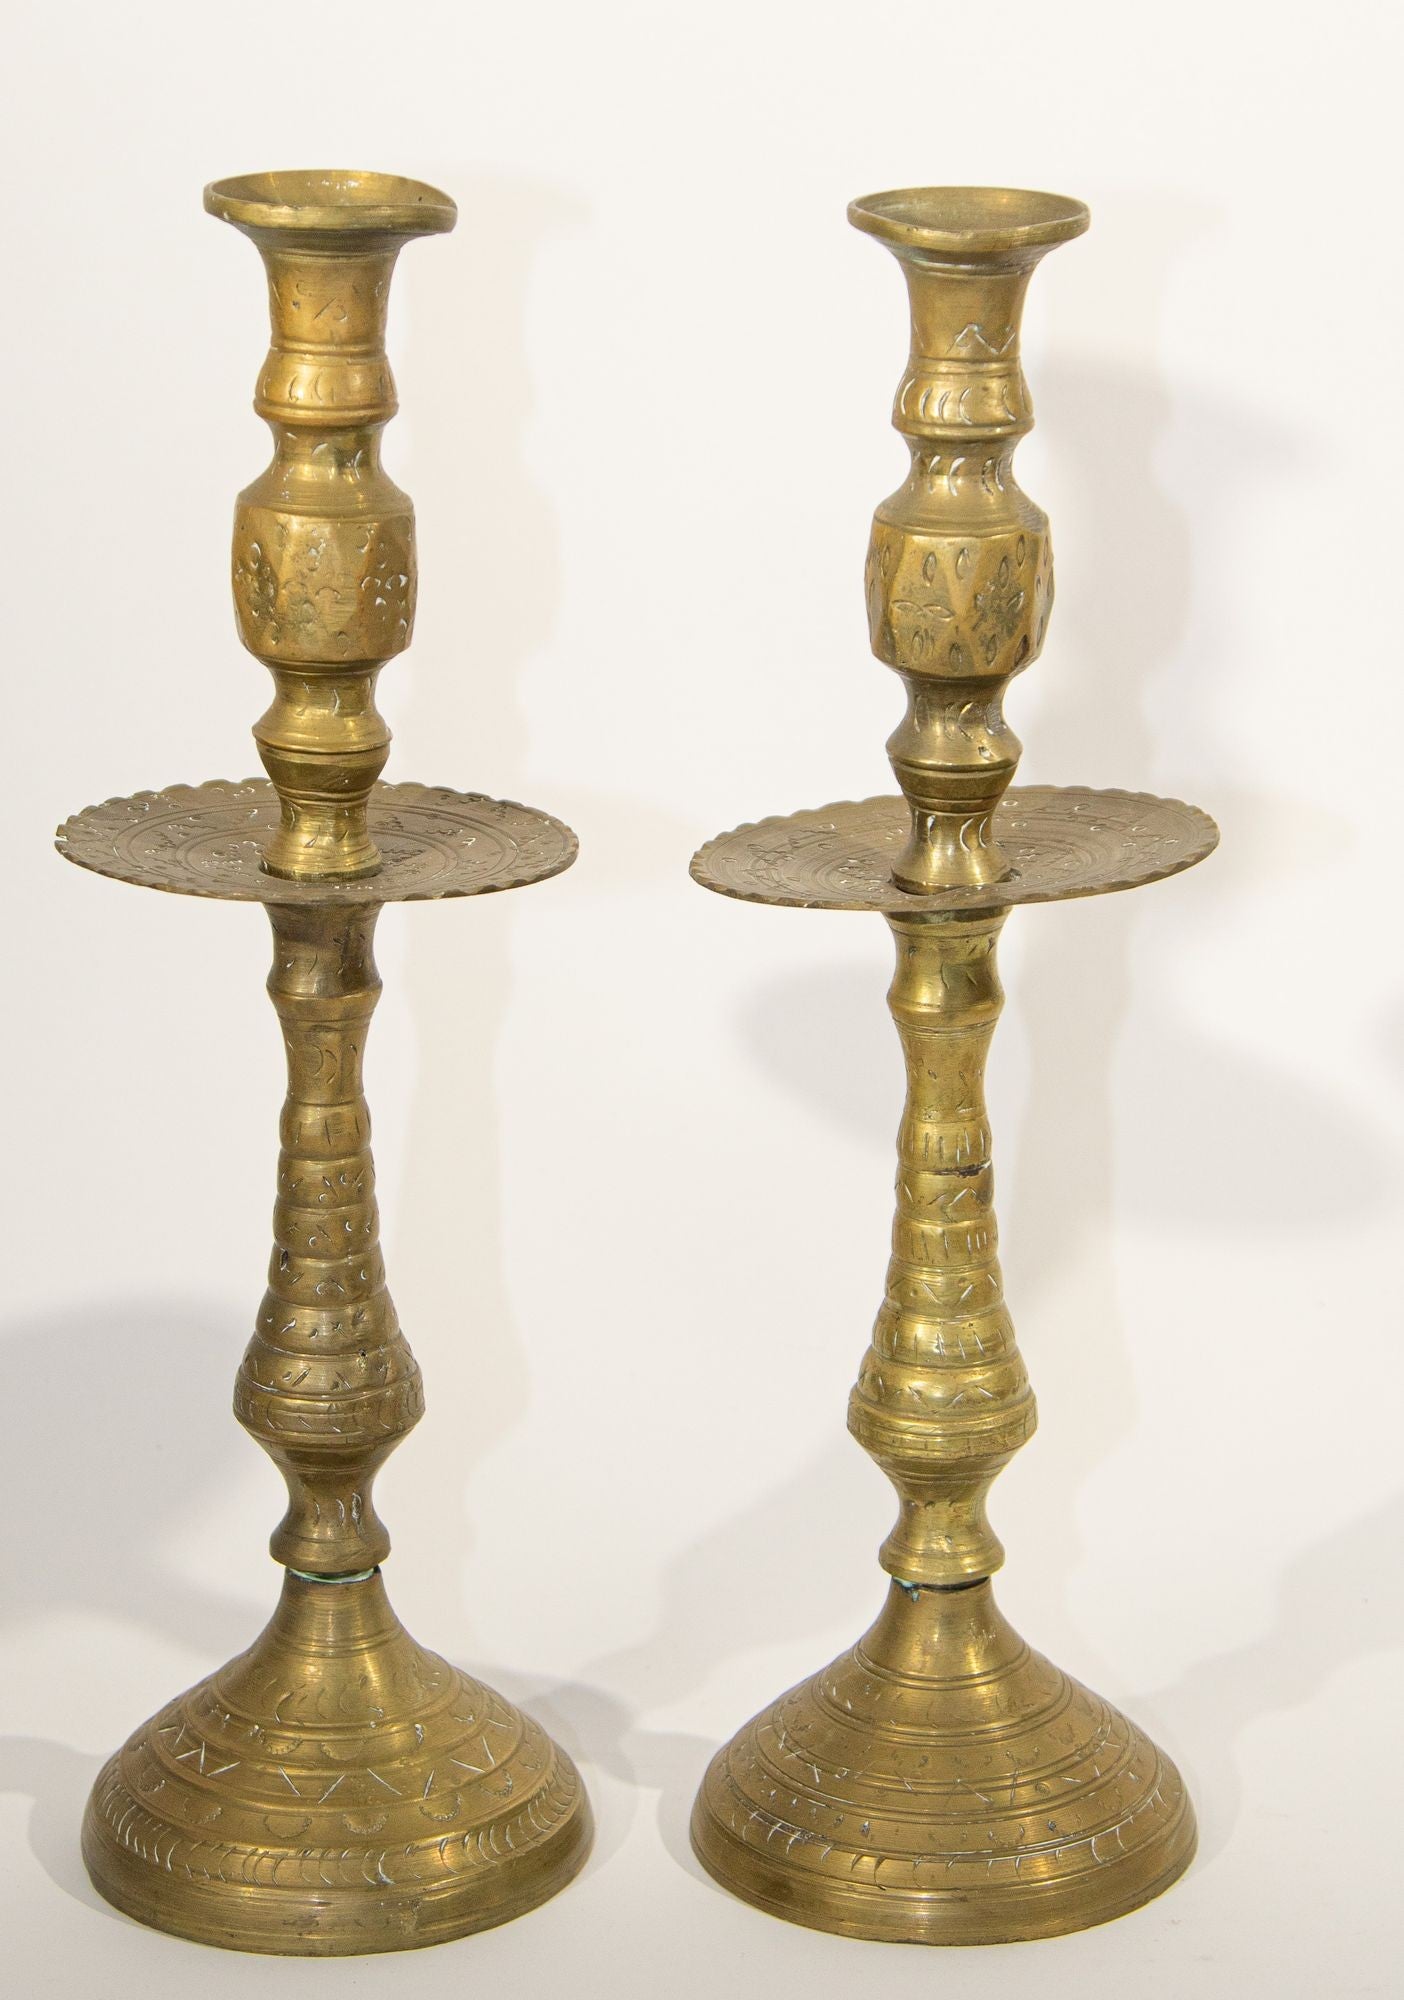 Solid Brass Vintage Moroccan Candle Holder a Pair 1950's - E-mosaik